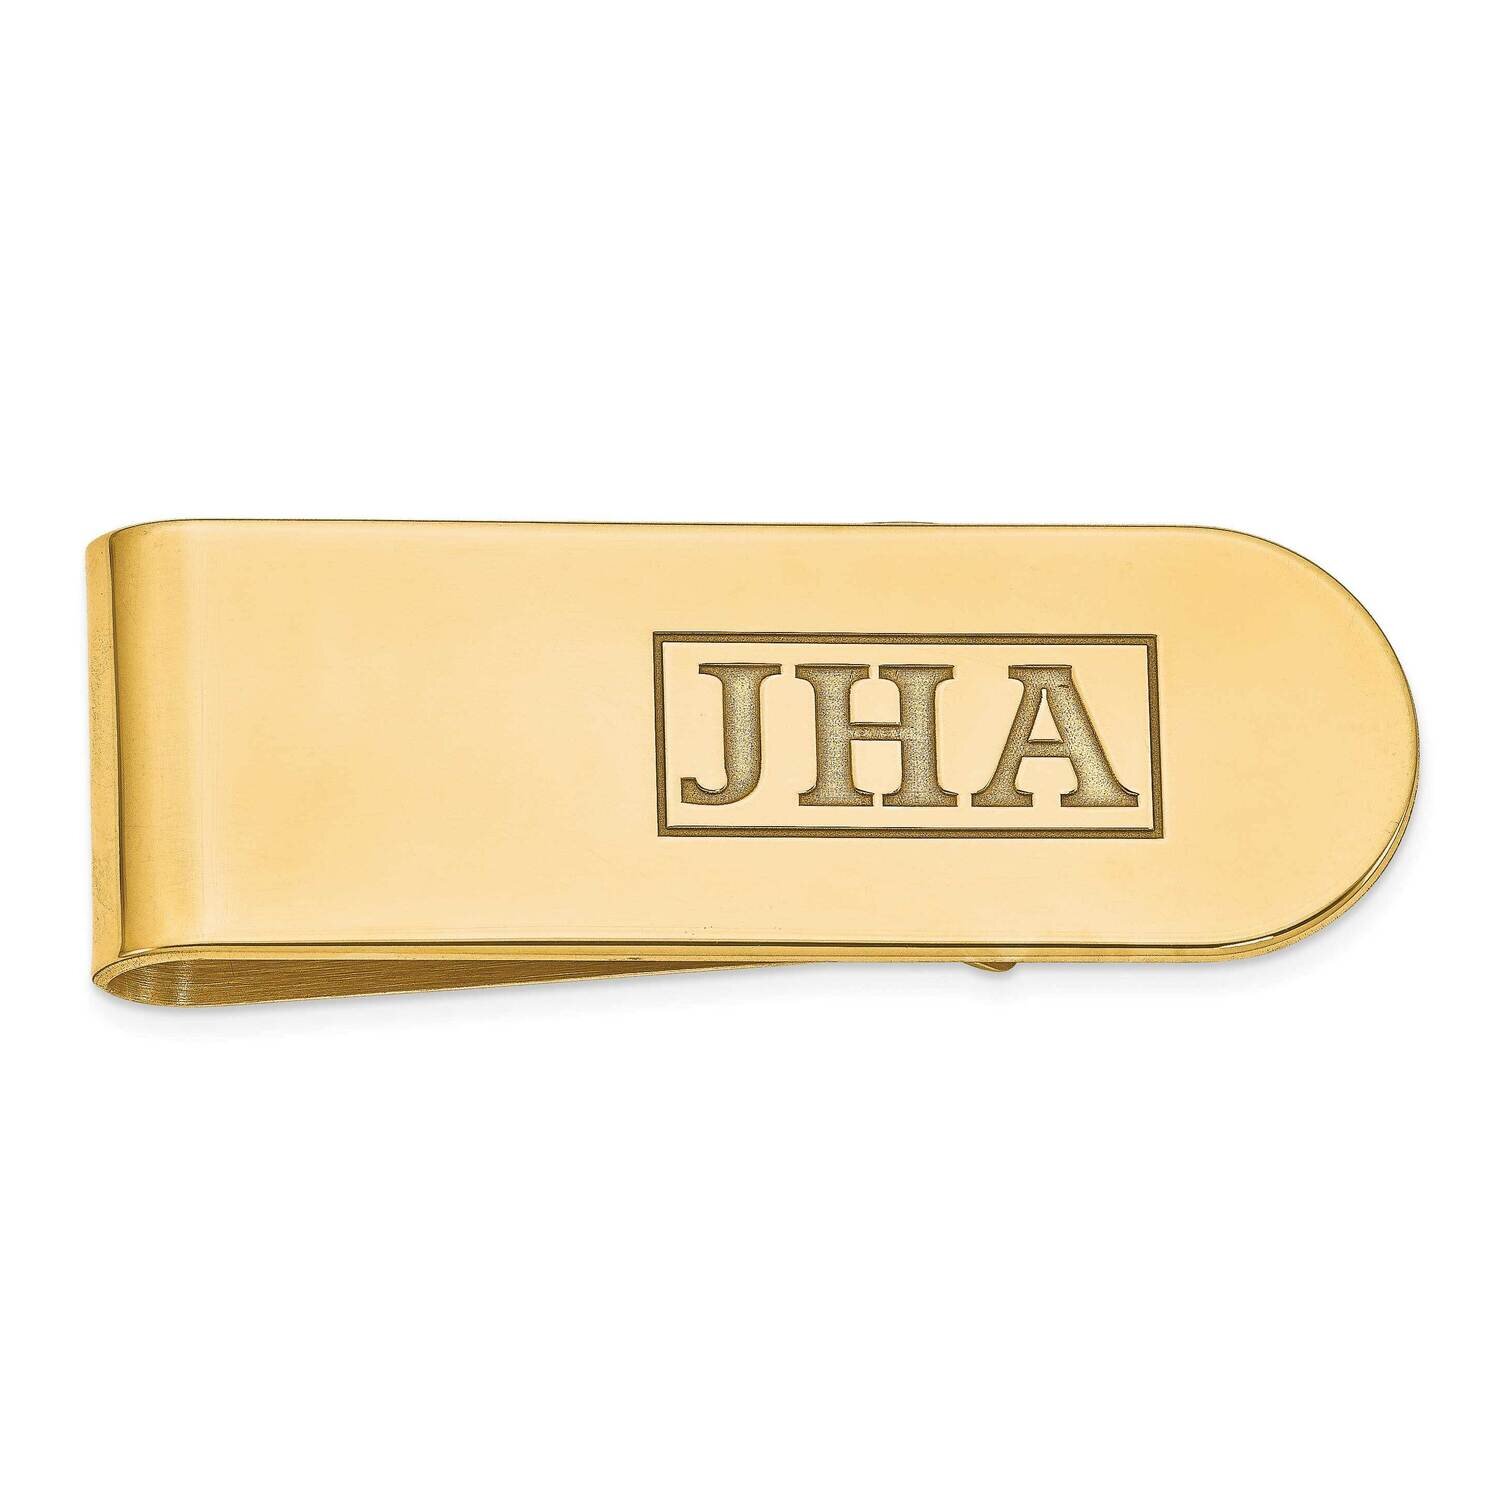 Recessed Letters Polished Monogram Money Clip Gold-plated Silver XNA606GP